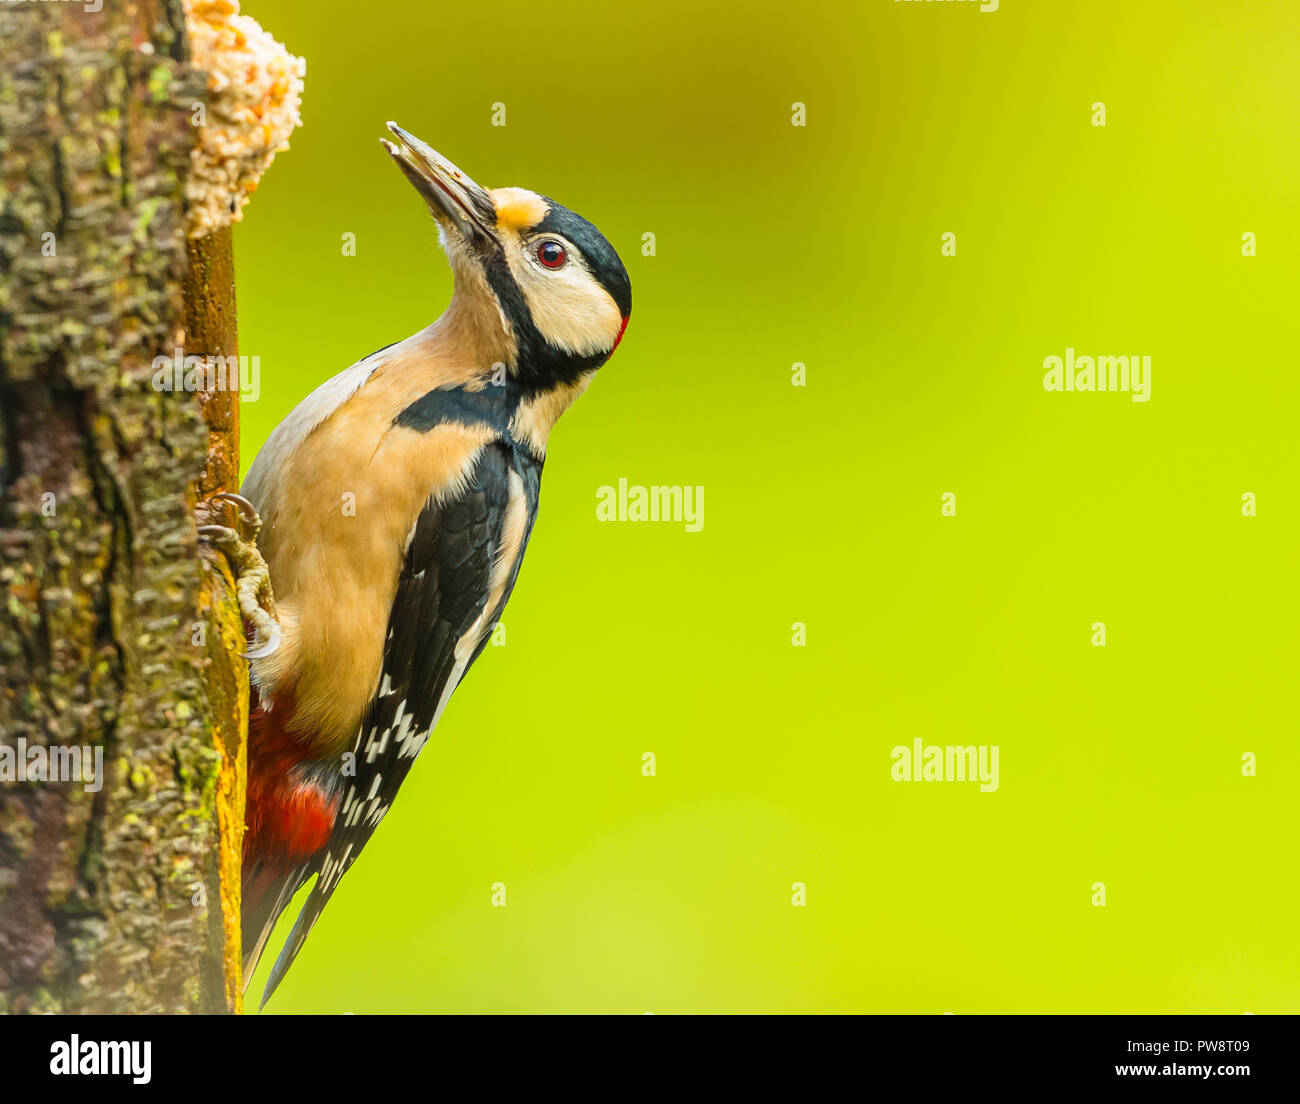 Great Spotted Woodpecker (Male) with red spot on nape of neck.  Feeding on suet fat balls with blurred green background.  Horizontal. Day. Stock Photo